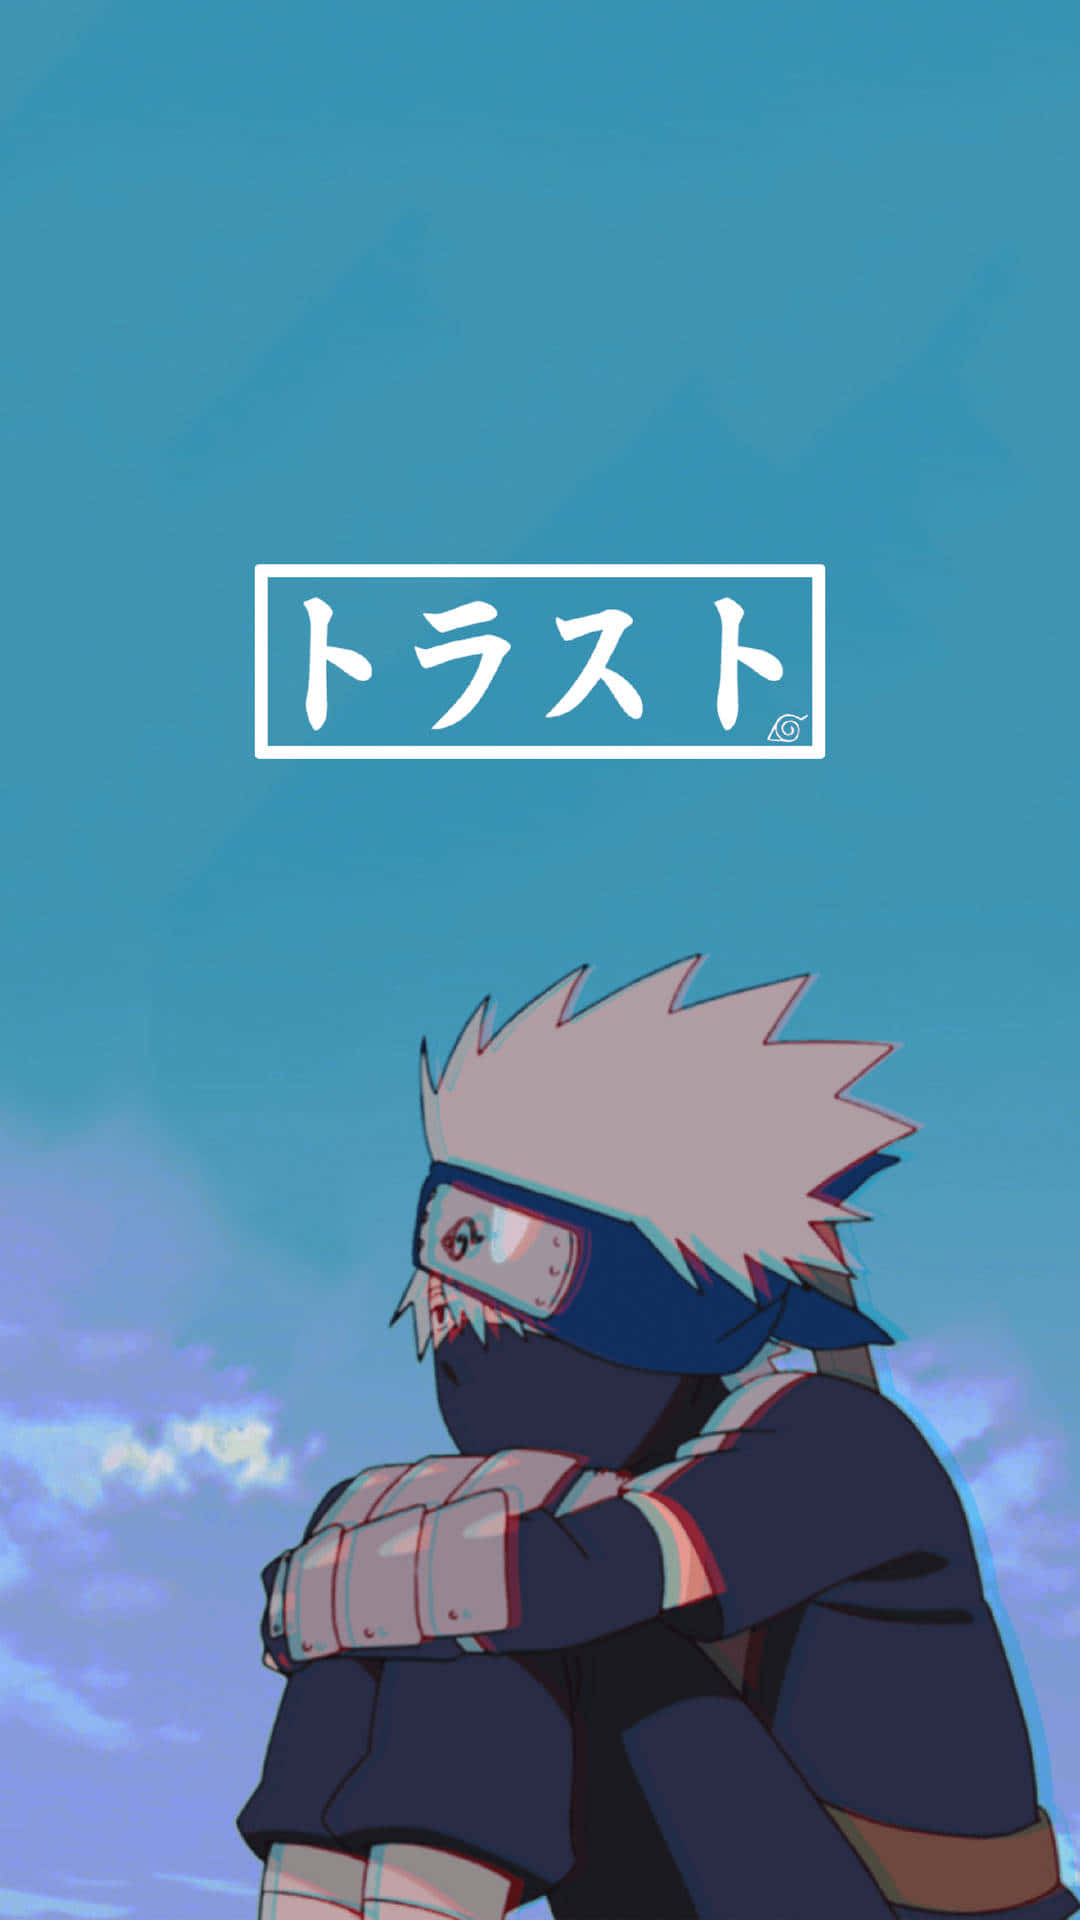 Aesthetic Naruto Wallpapers  Top 18 Best Aesthetic Naruto Wallpapers  HQ 